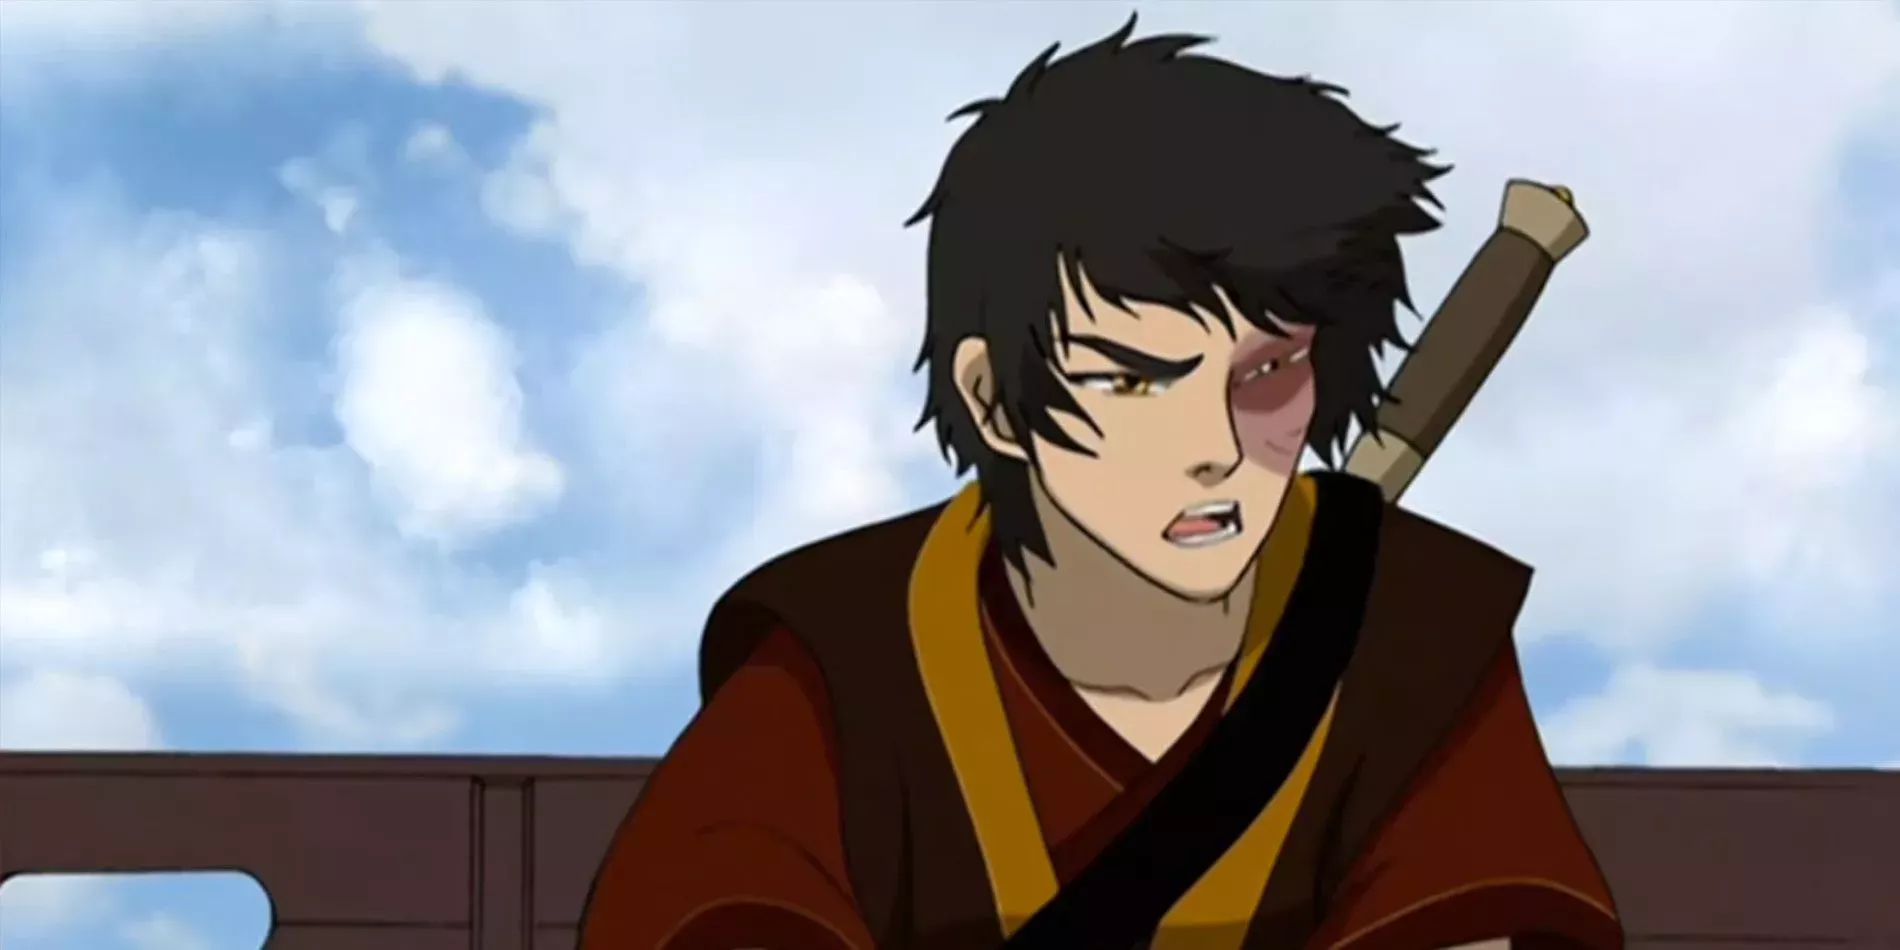 Zuko from Avatar: The Last Airbender talks while riding aboard Appa.